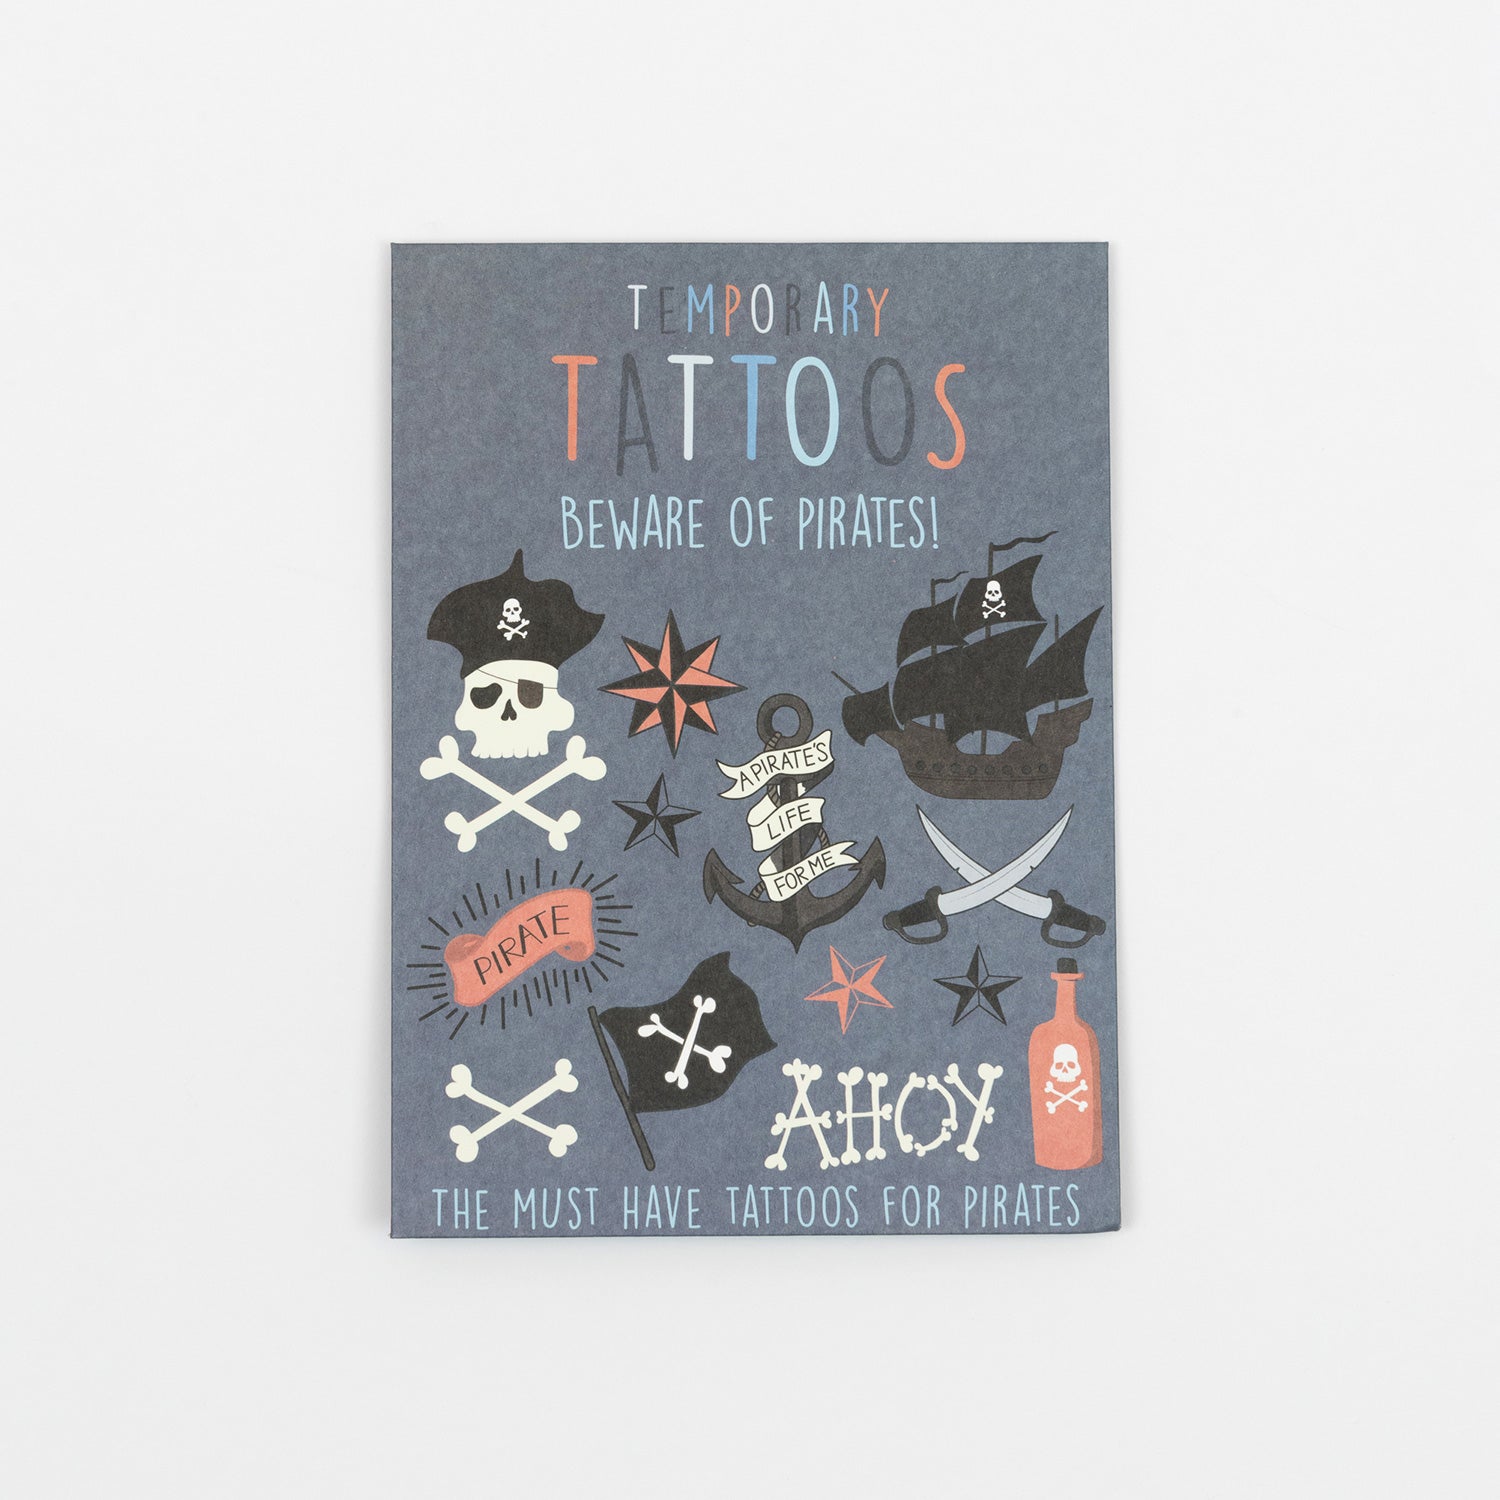 A pack of temporary pirate tattoos for children.